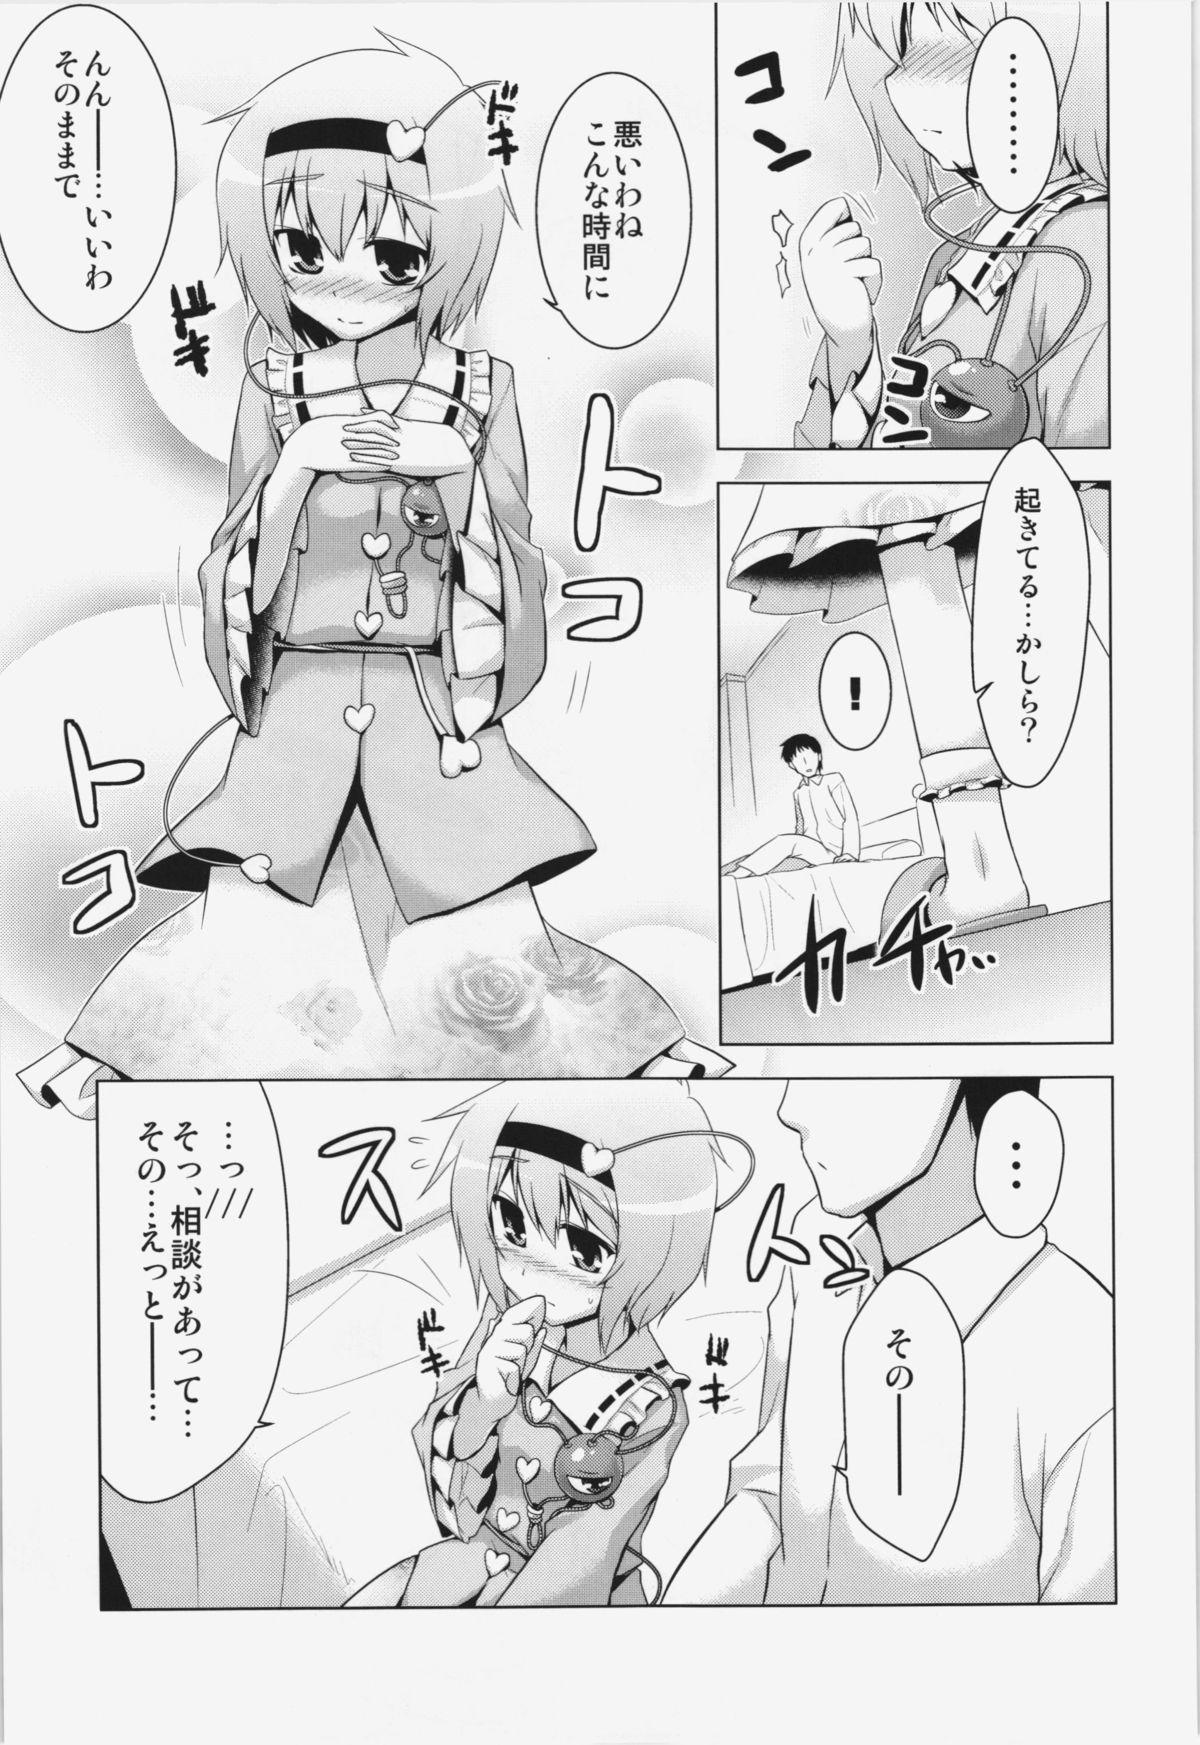 Gostosa Please Give Me! - Touhou project Small - Page 3